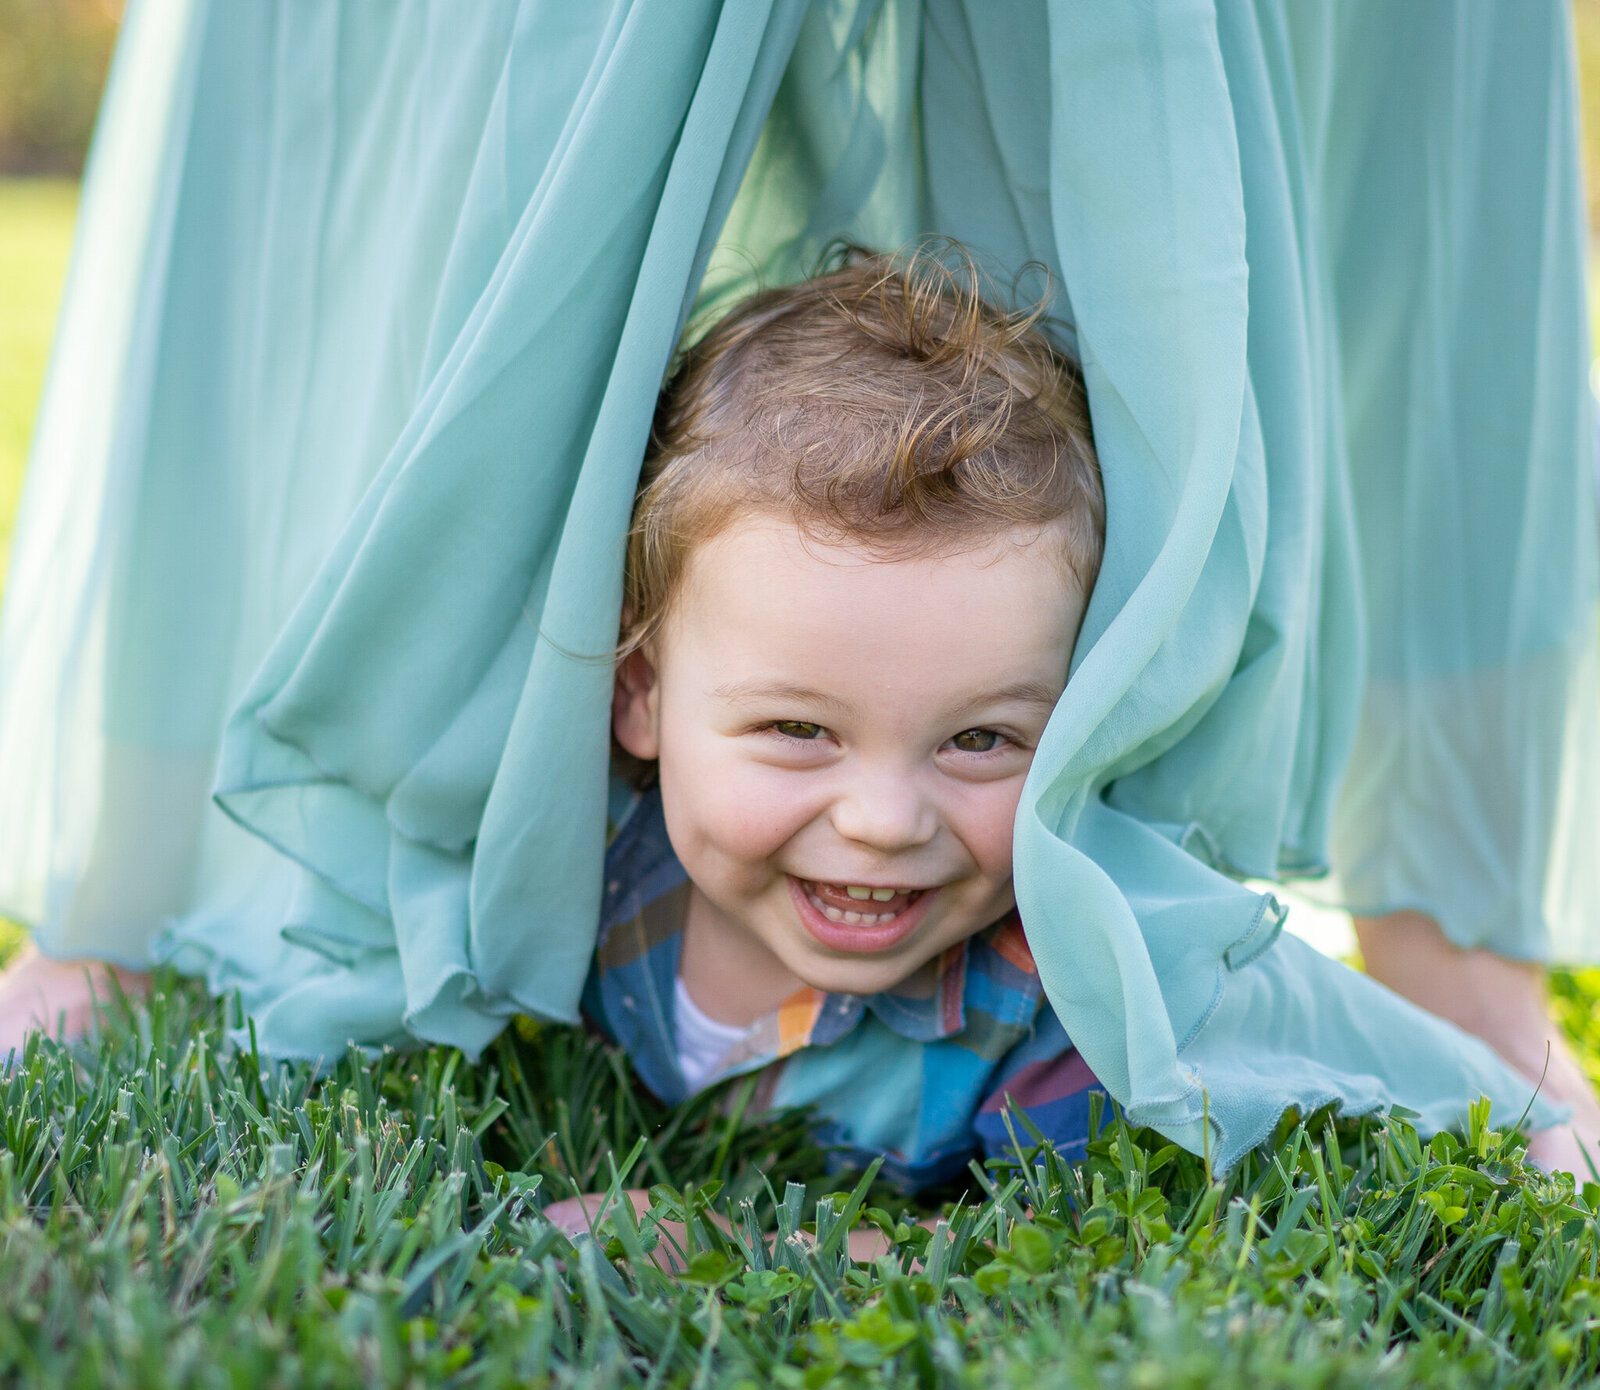 18-month-old Lincoln giggles as his mom flutters her dress around him in Columbus, Ohio.